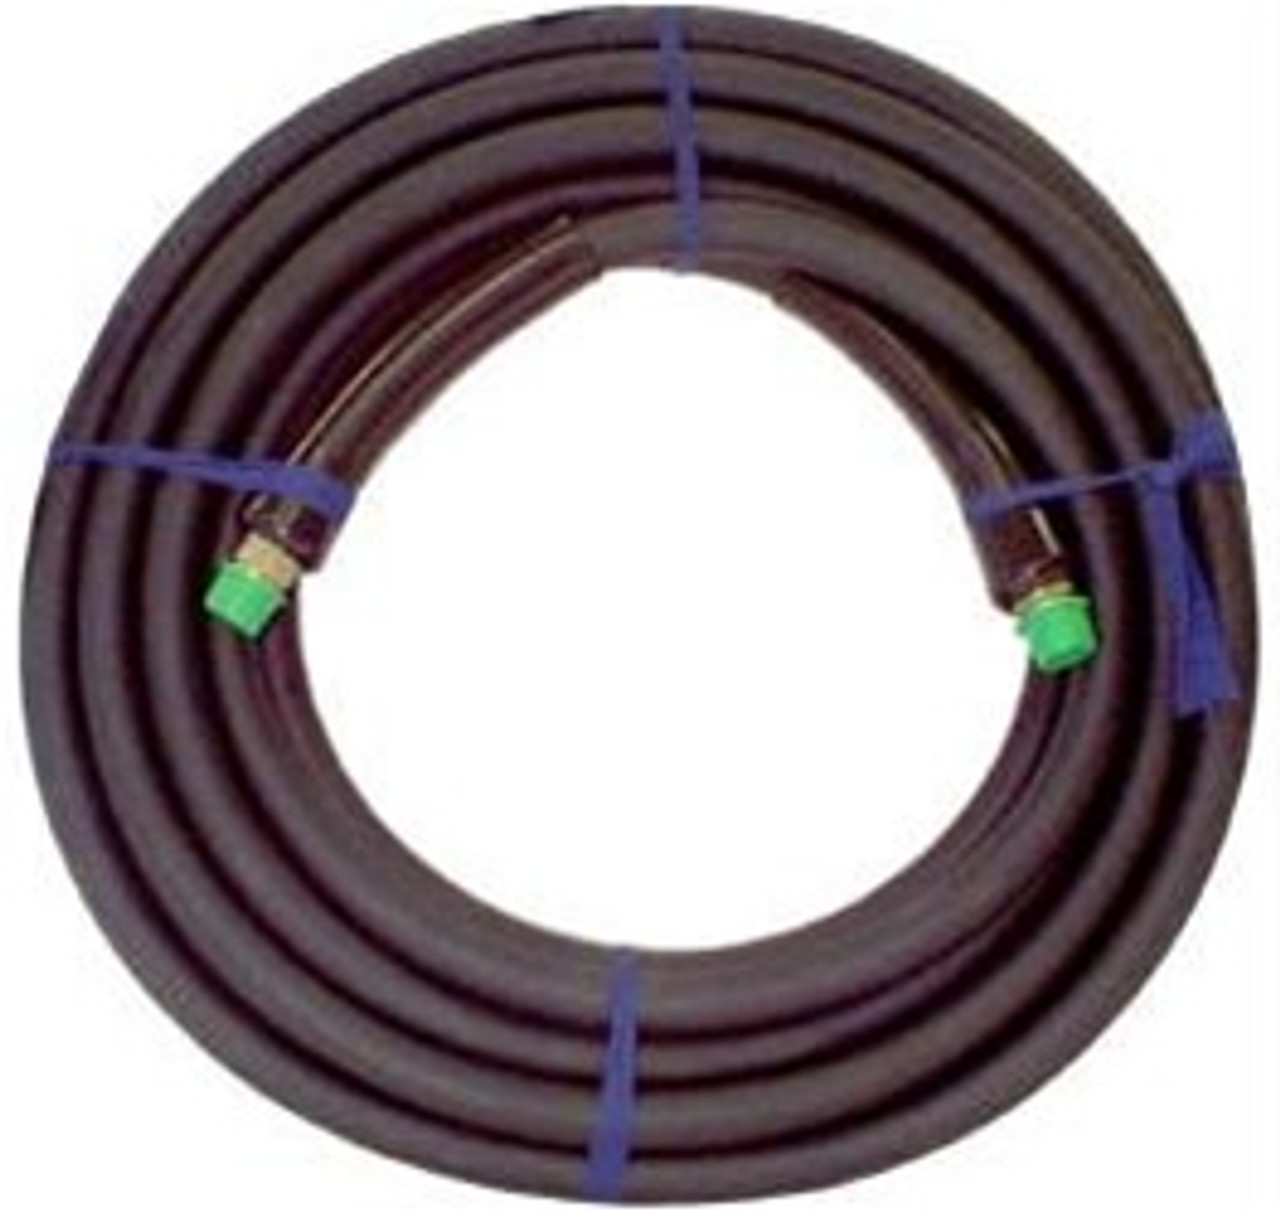 Steam Jenny JD7624-A 3/8" Id X 25' Combo Pressure Washer/Steam Cleaner Hose